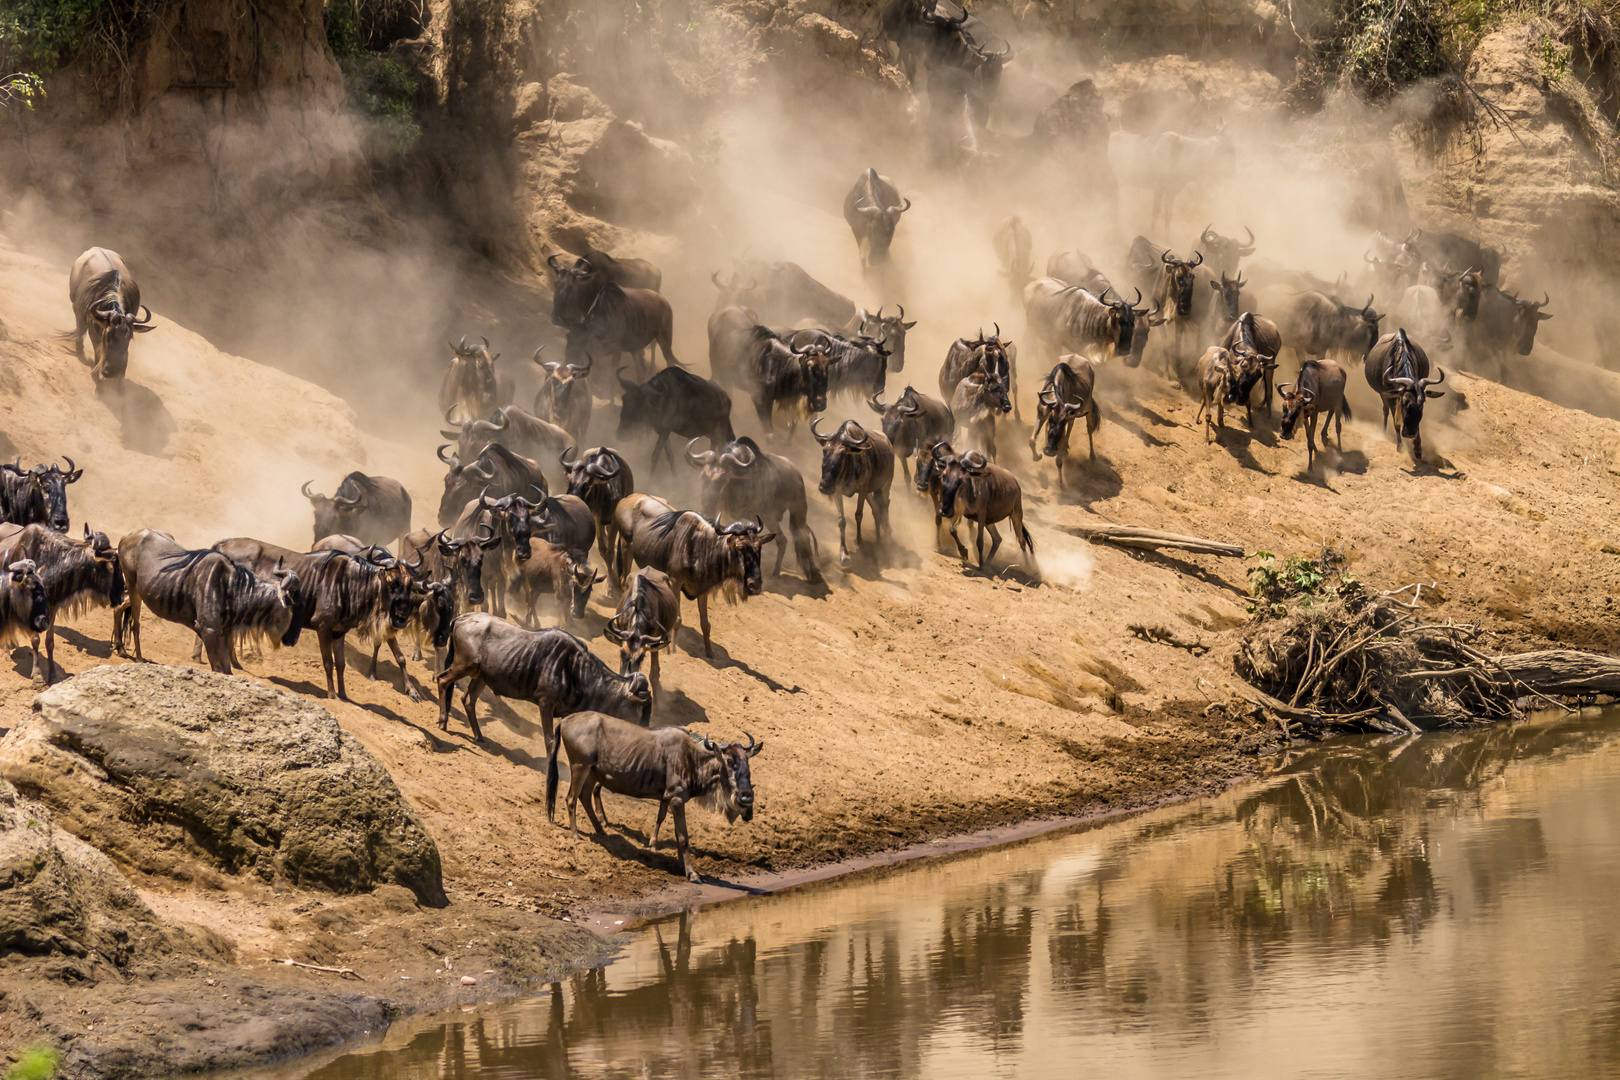 WHY GO FOR THE GREAT WILDEBEEST MIGRATION?